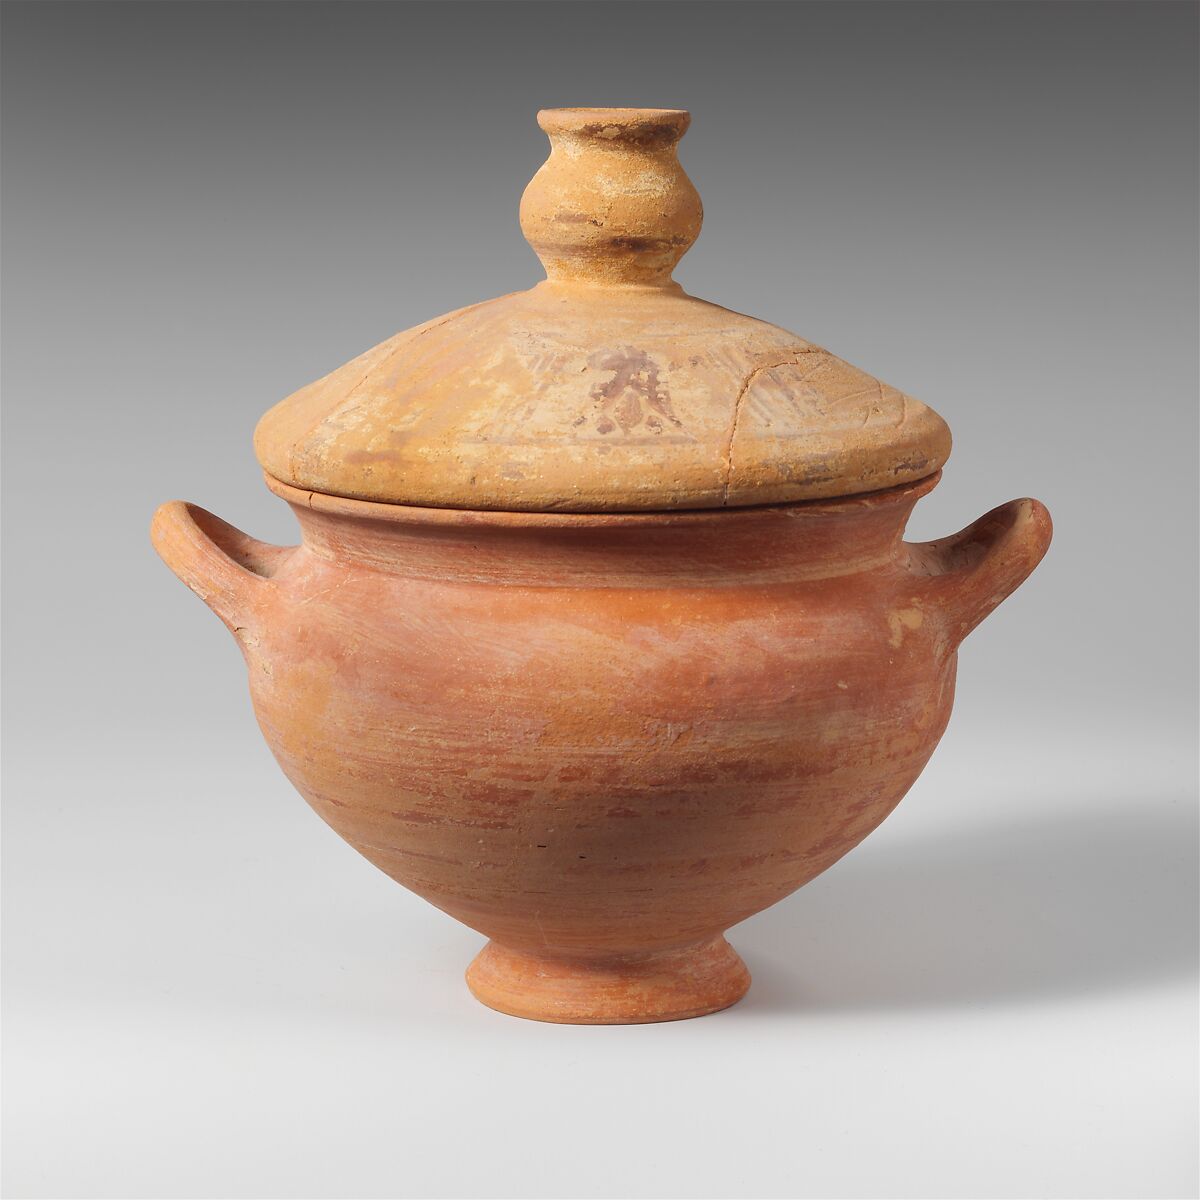 Terracotta skyphos (deep drinking cup) with lid, Terracotta, Lydian 